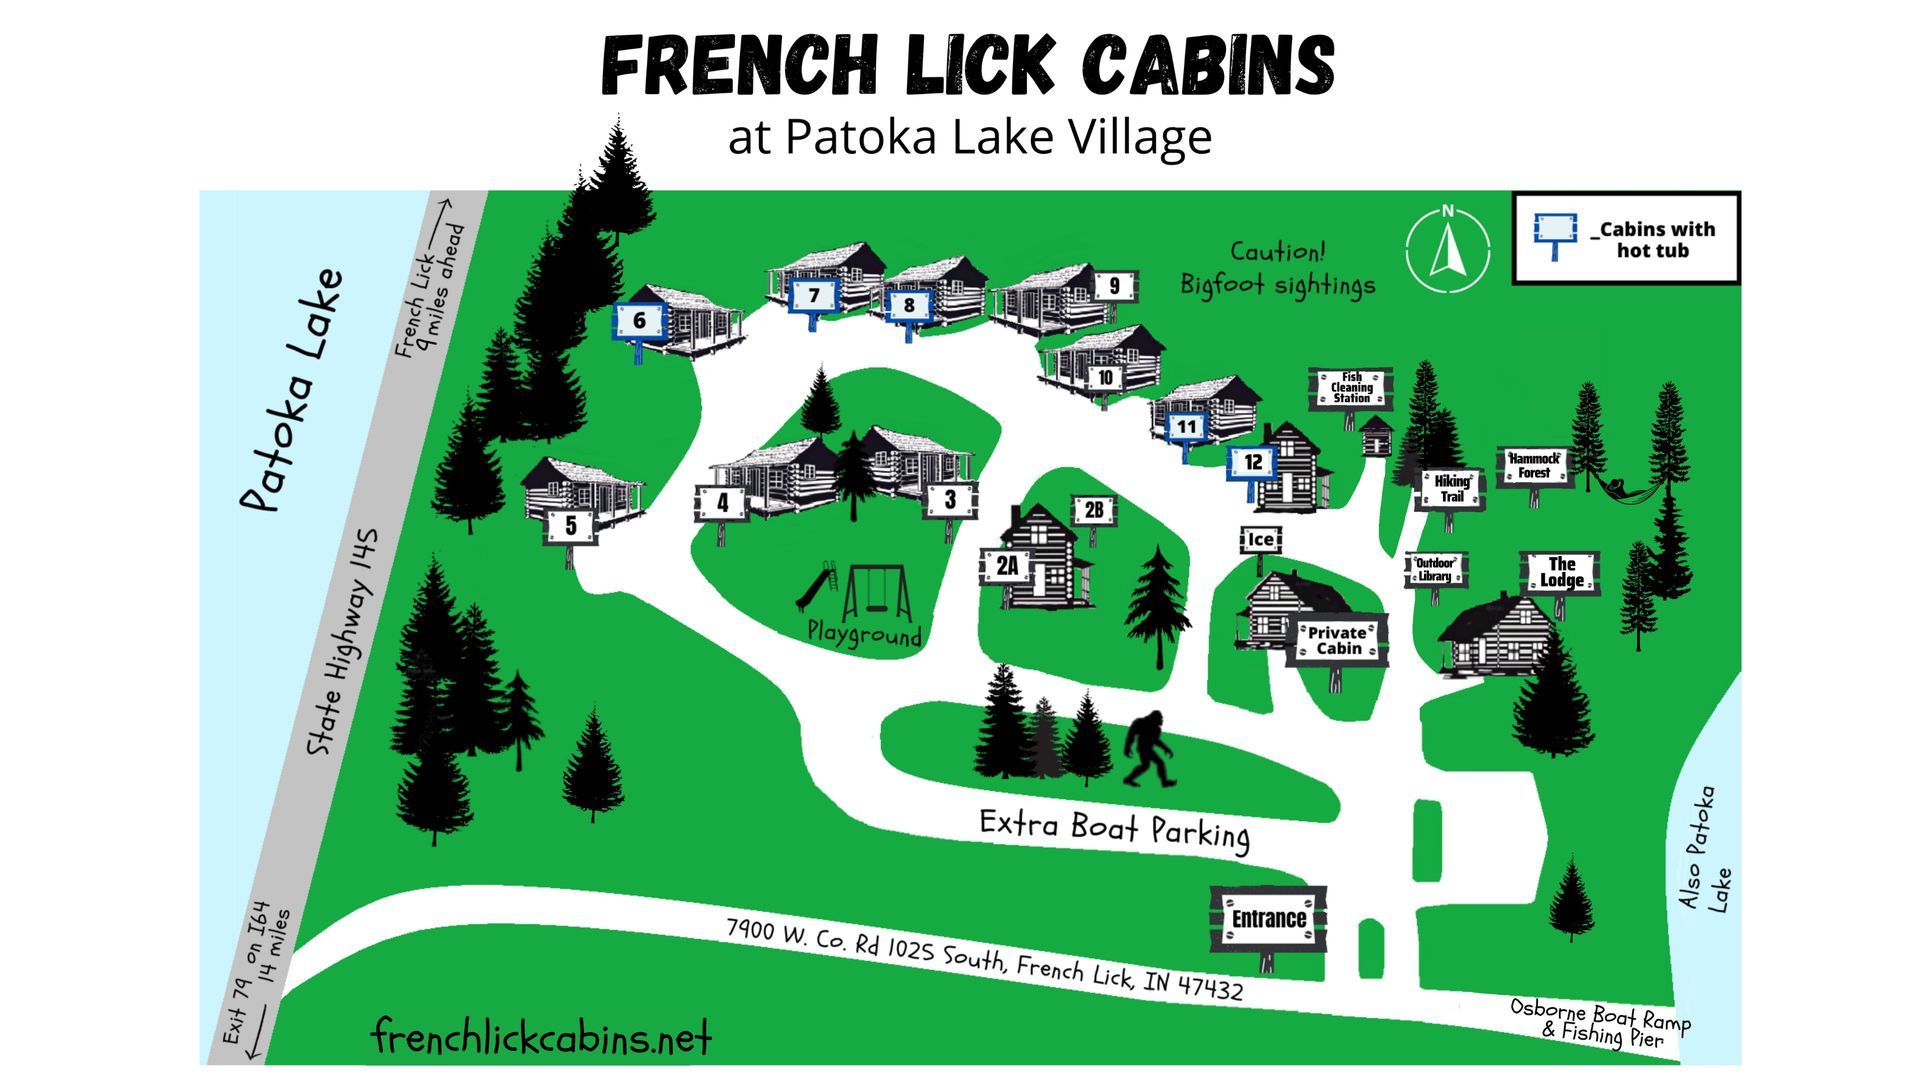 Map of cabins and grounds